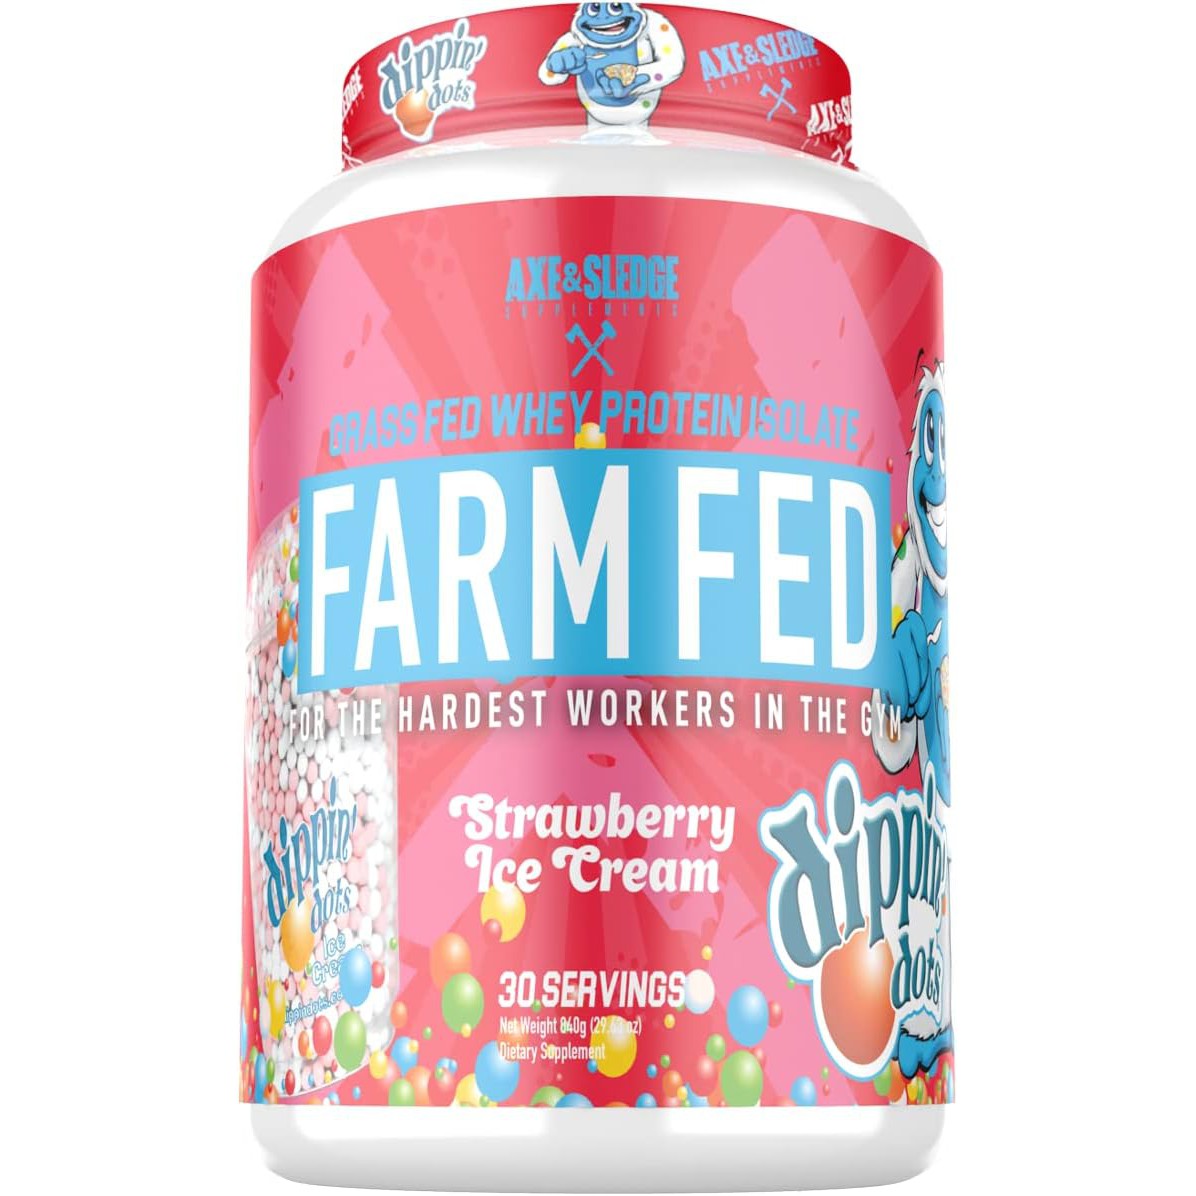 Axe & Sledge Supplements Farm Fed Grass-Fed Whey Protein Isolate with Digestive Enzymes, 22 Grams Protein, 840g 30 Servings - Dippin' Dots Strawberry Ice Cream